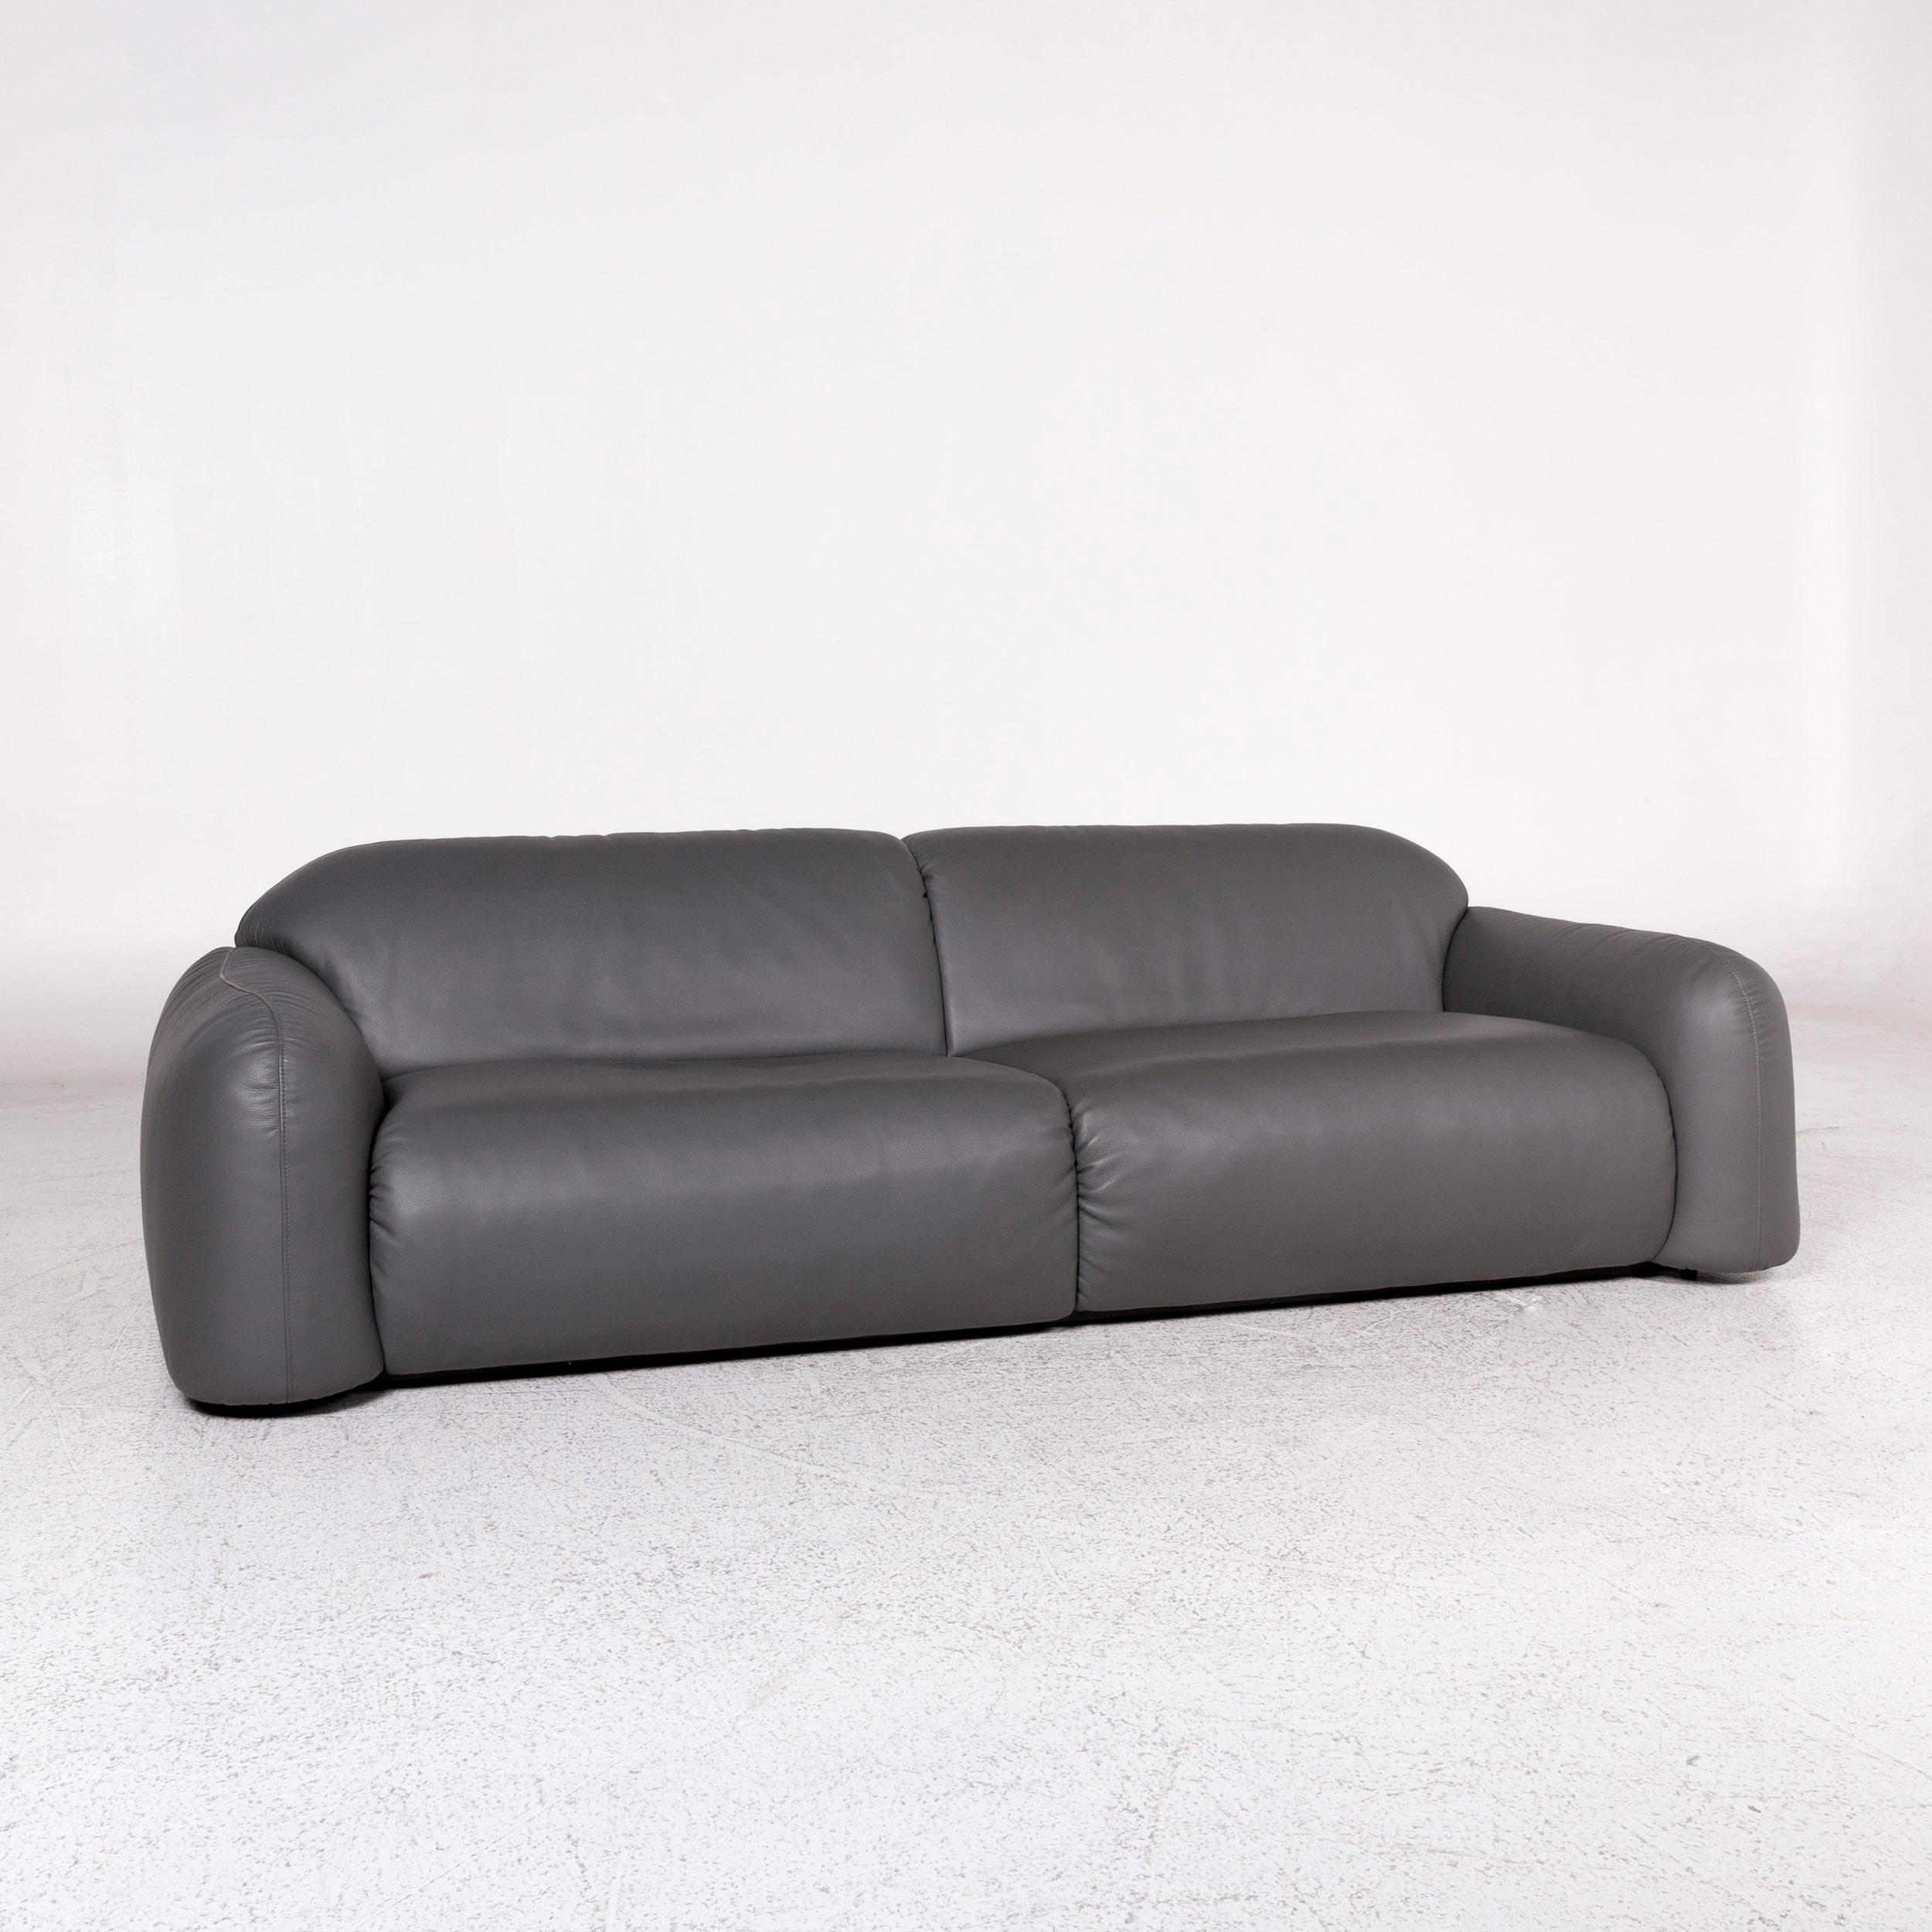 We bring to you a Busnelli Piumotto leather sofa gray three-seat Marco Boga couch.

 Product measurements in centimeters:
 
Depth: 109
Width: 258
Height: 71
Seat-height: 41
Rest-height: 55
Seat-depth: 65
Seat-width: 197
Back-height: